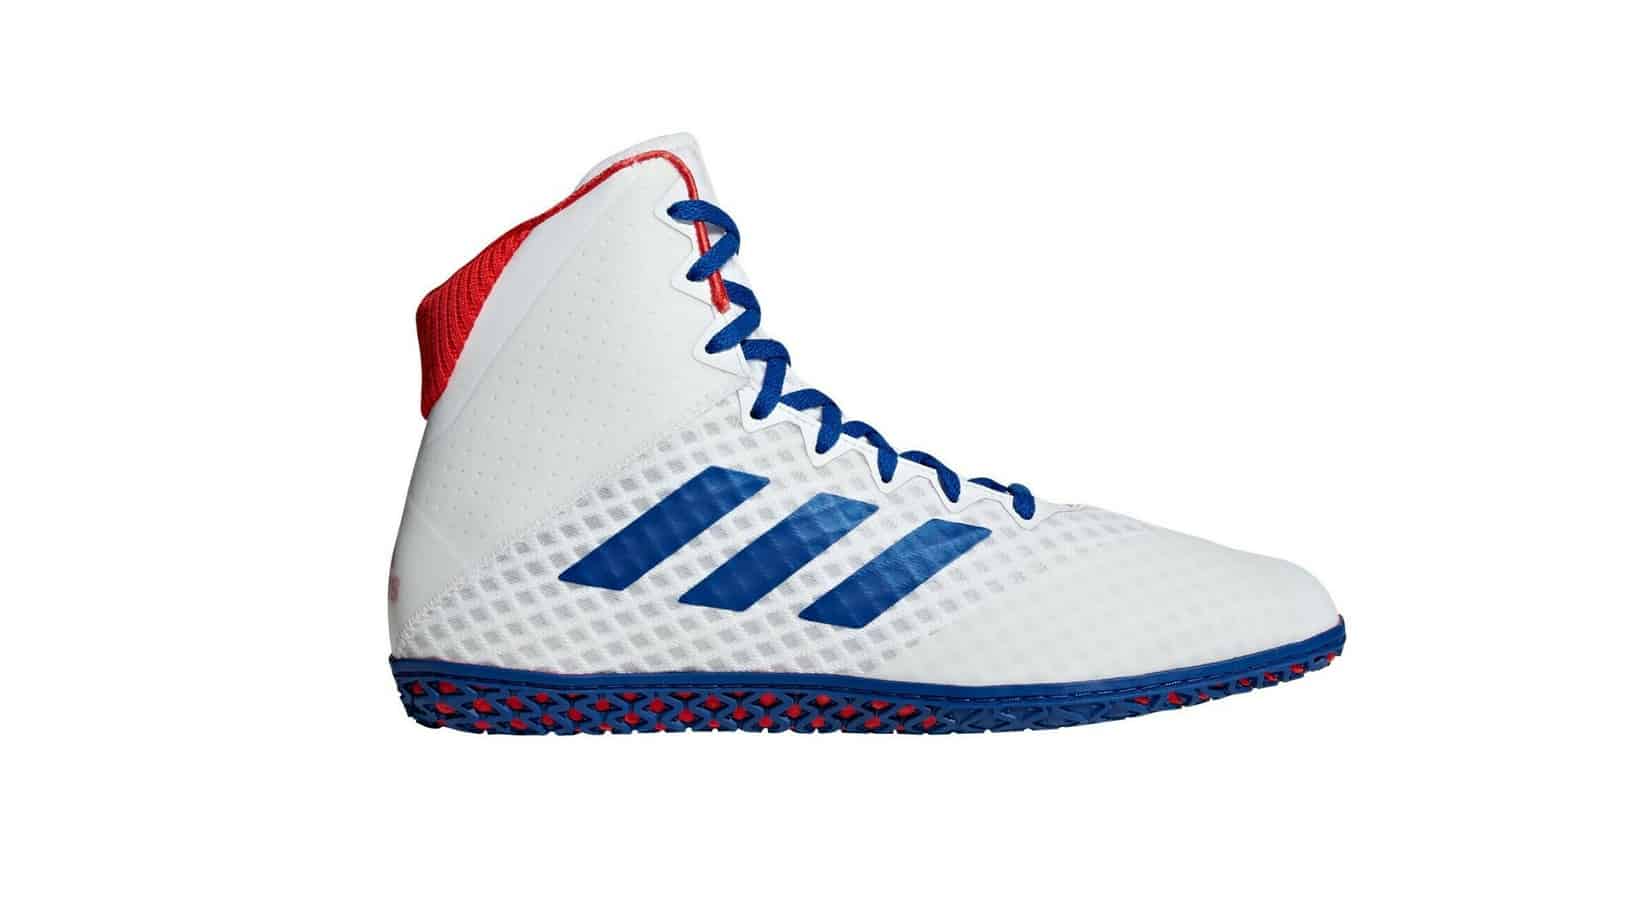 Adidas Wizard MMA Shoes